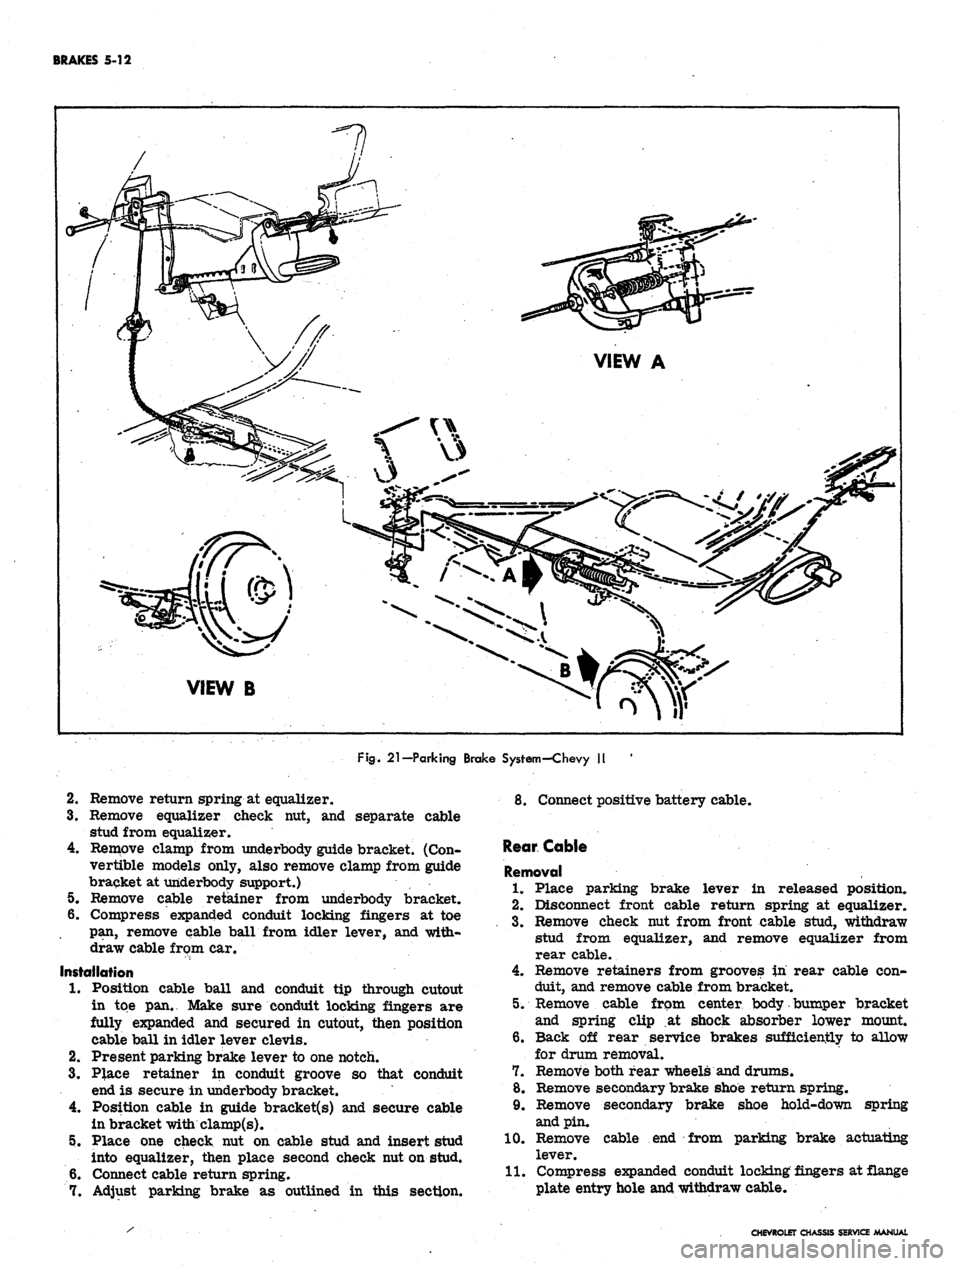 CHEVROLET CAMARO 1967 1.G Chassis Workshop Manual 
BRAKES 5-12

VIEW B

Fig.
 21—Parking Brake System-Chevy II

2.
 Remove return spring at equalizer.

3.
 Remove equalizer check nut, and separate cable

stud from equalizer.

4.
 Remove clamp from 